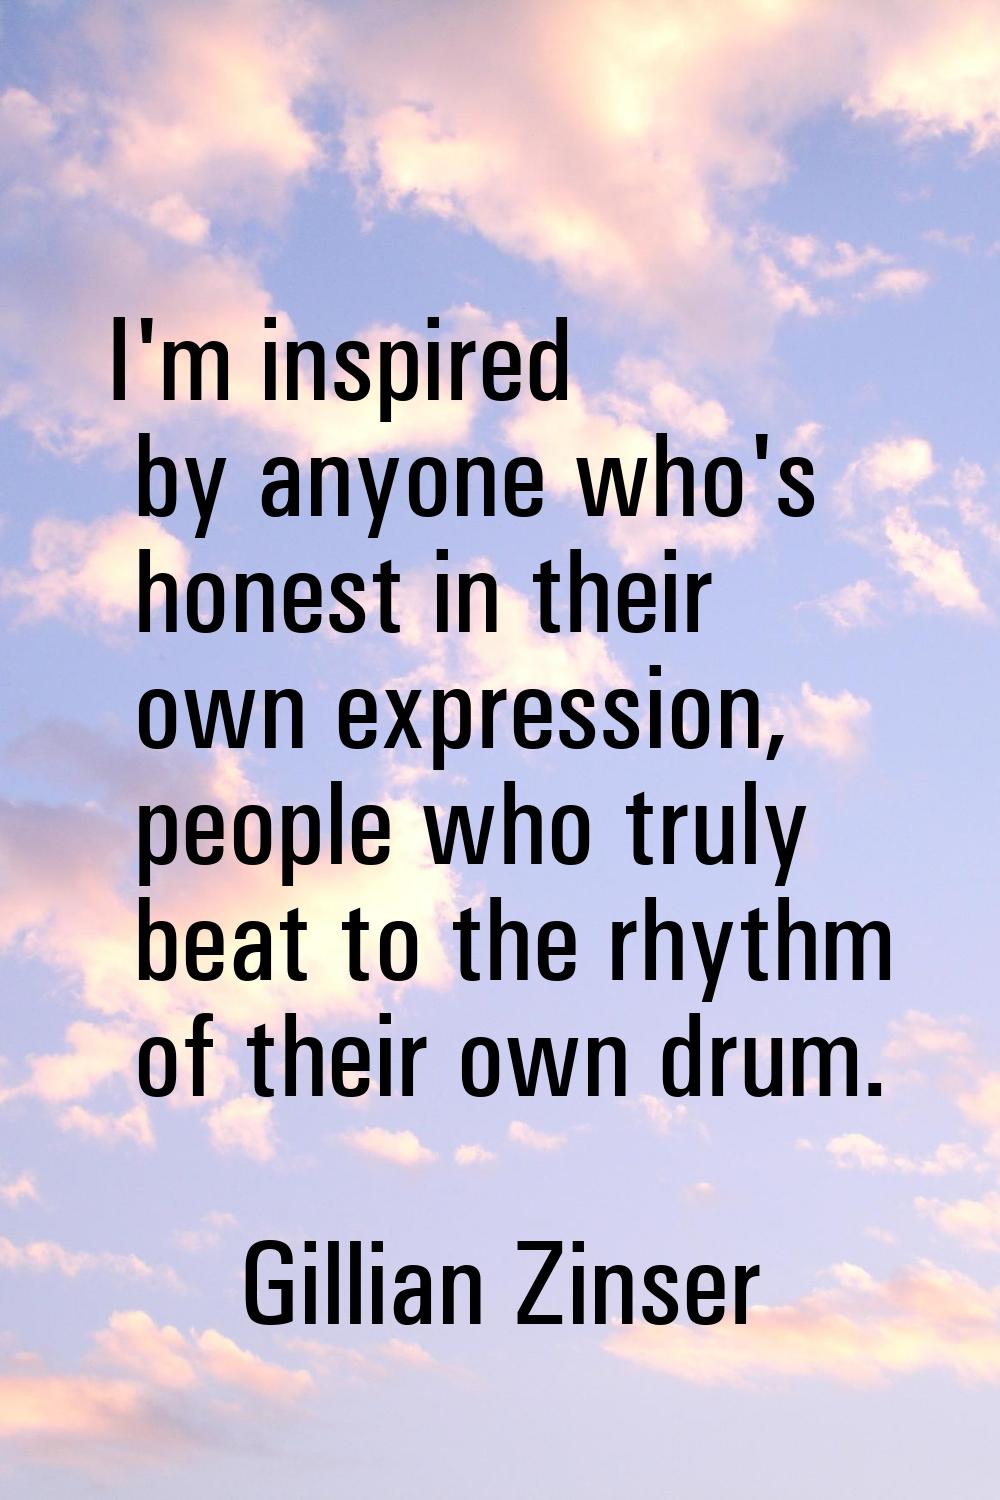 I'm inspired by anyone who's honest in their own expression, people who truly beat to the rhythm of